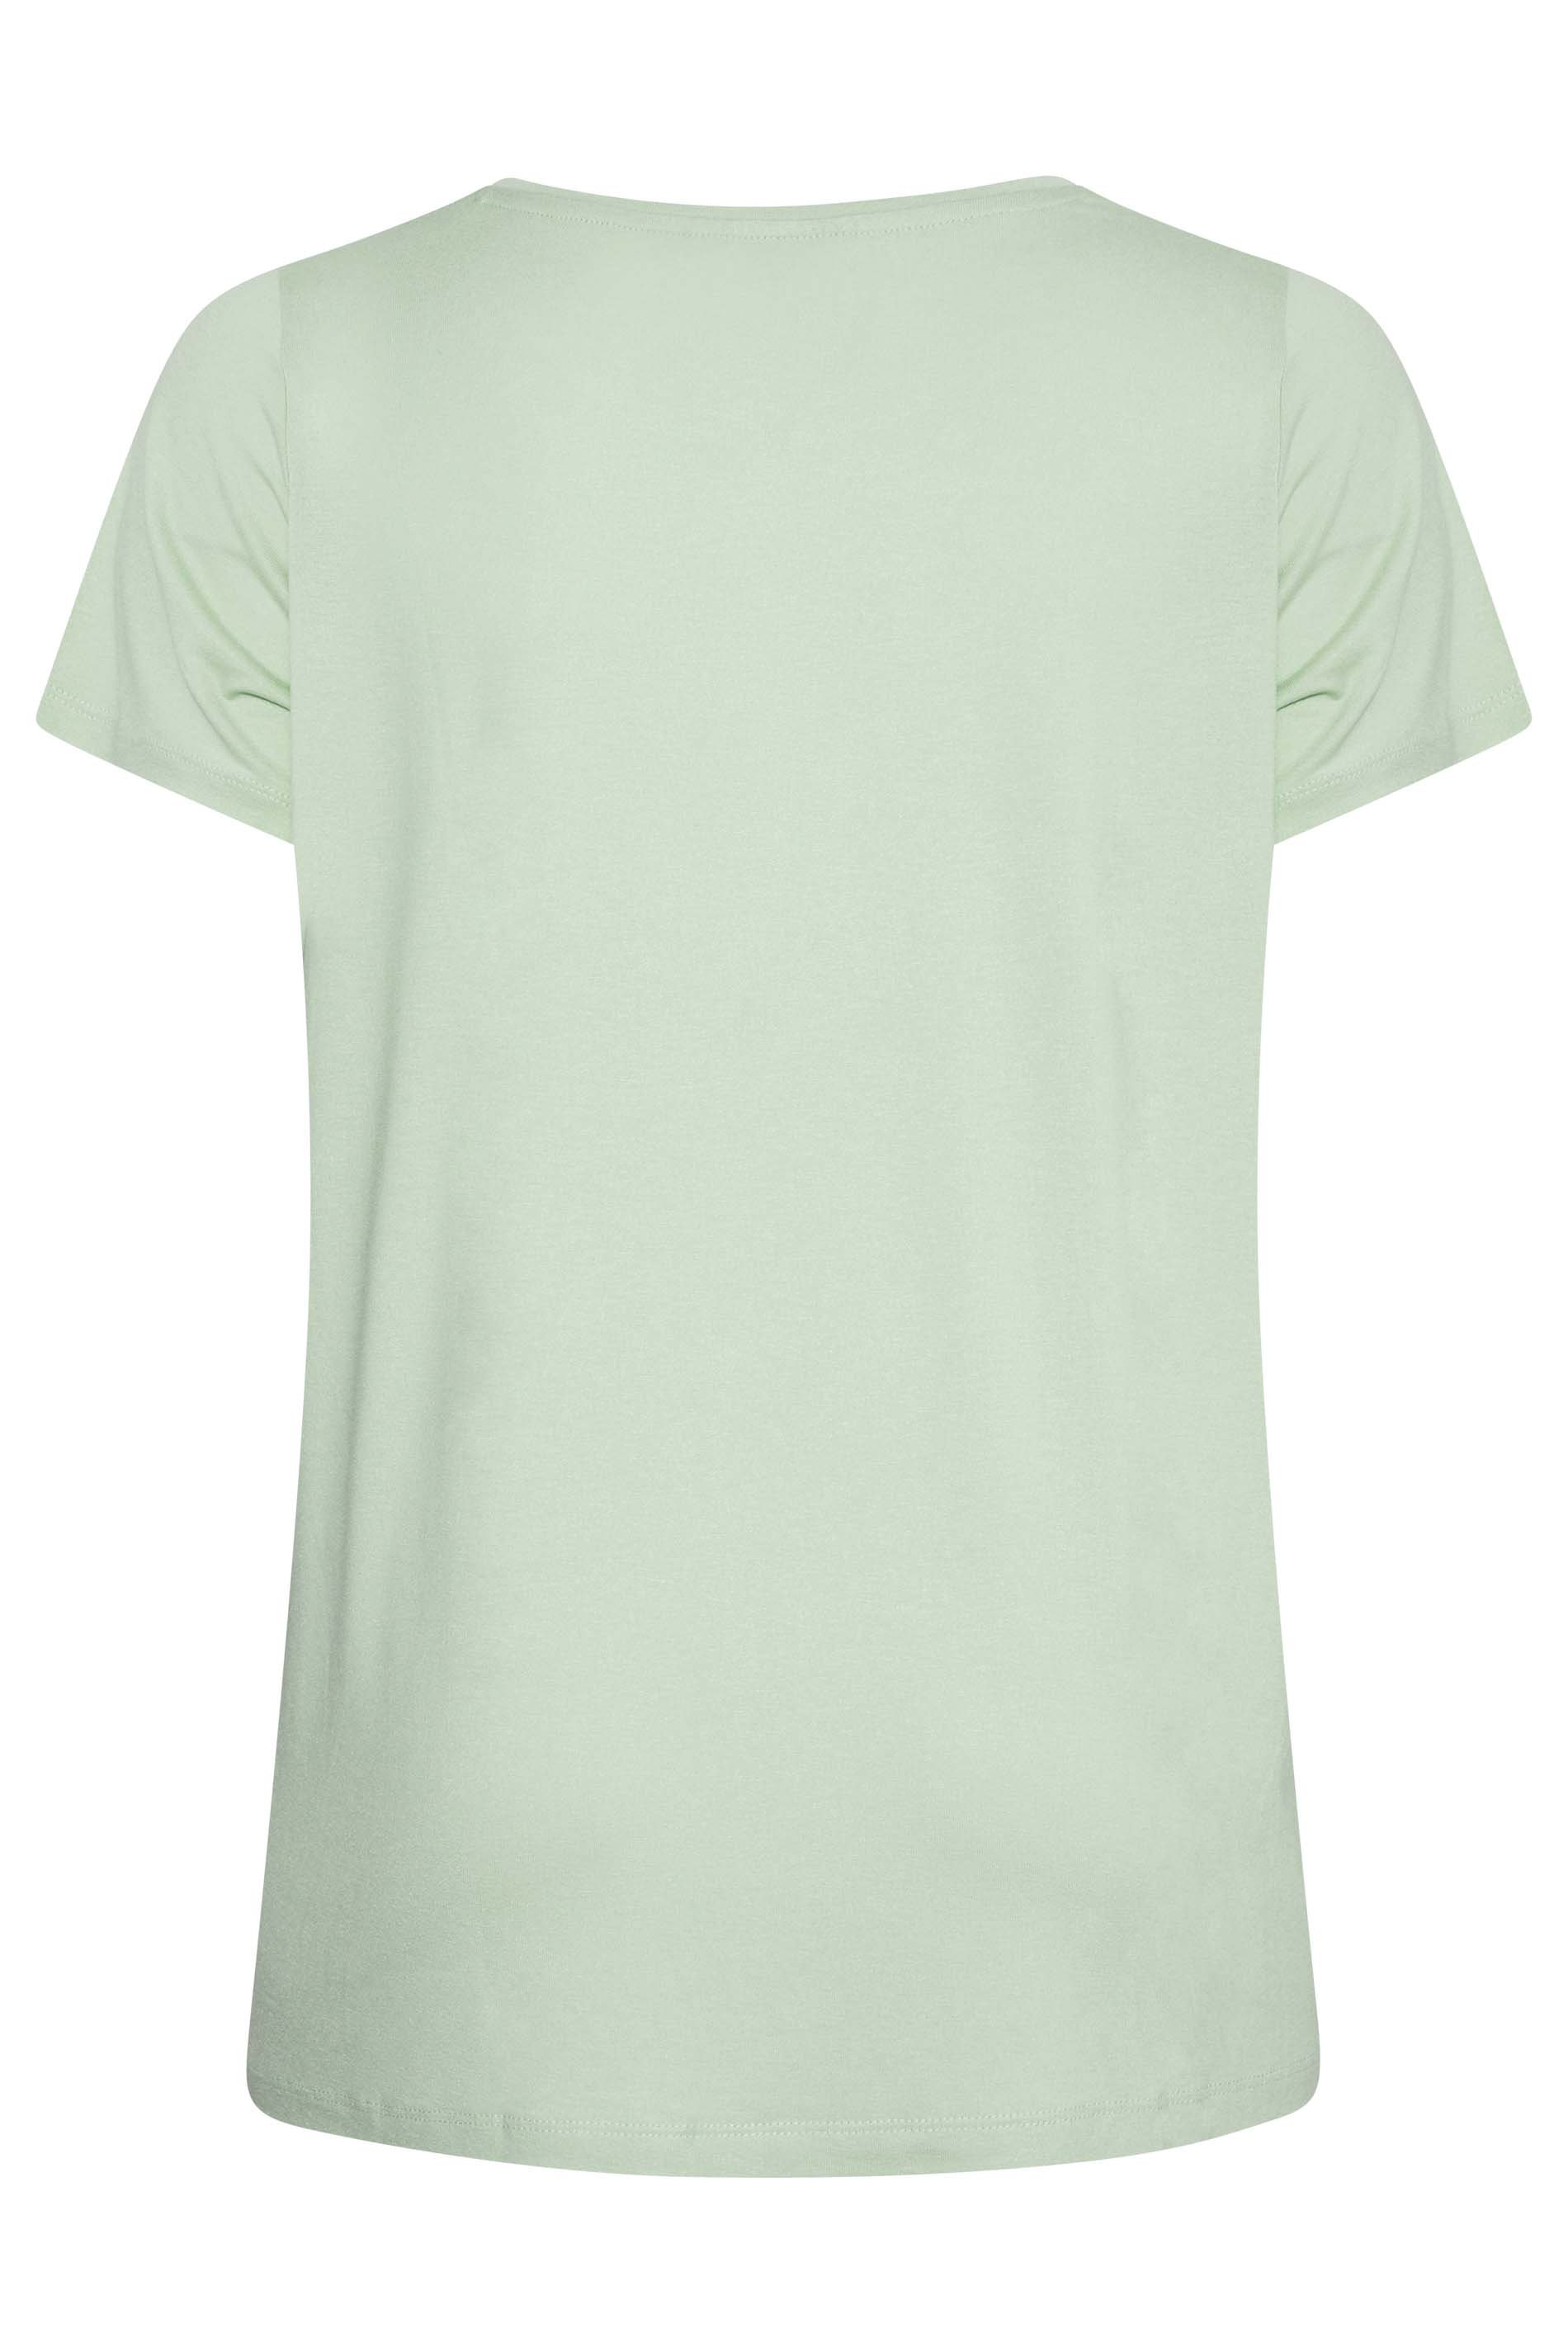 Grande taille  Tops Grande taille  Tops à Slogans | T-Shirt Vert Menthe Papillon 'Only For You' - FX07557